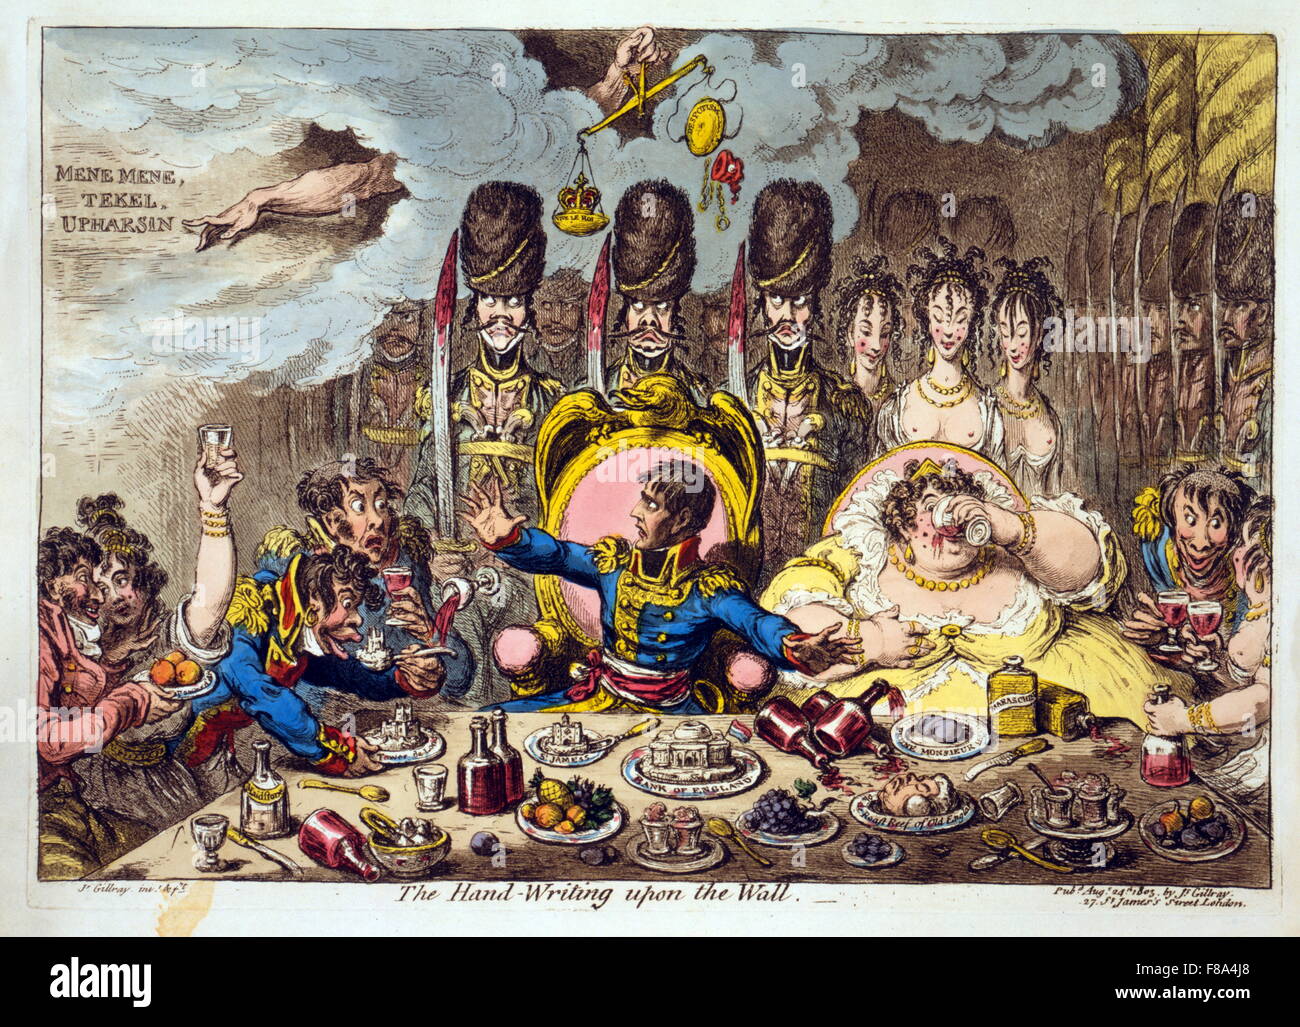 Etching, aquatint, hand-coloured engraving entitled 'The Hand-writing upon the wall' by James Gillray (1756-1815). Napoleon, Josephine, French soldiers and women seated at a feast with dishes 'Bank of England', 'St. James,' 'Tower of London,' and 'Roast Beef of old England.' Napoleon looks in horror at hand of Jehovah pointing to words in sky: 'Mene Mene, tekel upharsin.' Stock Photo